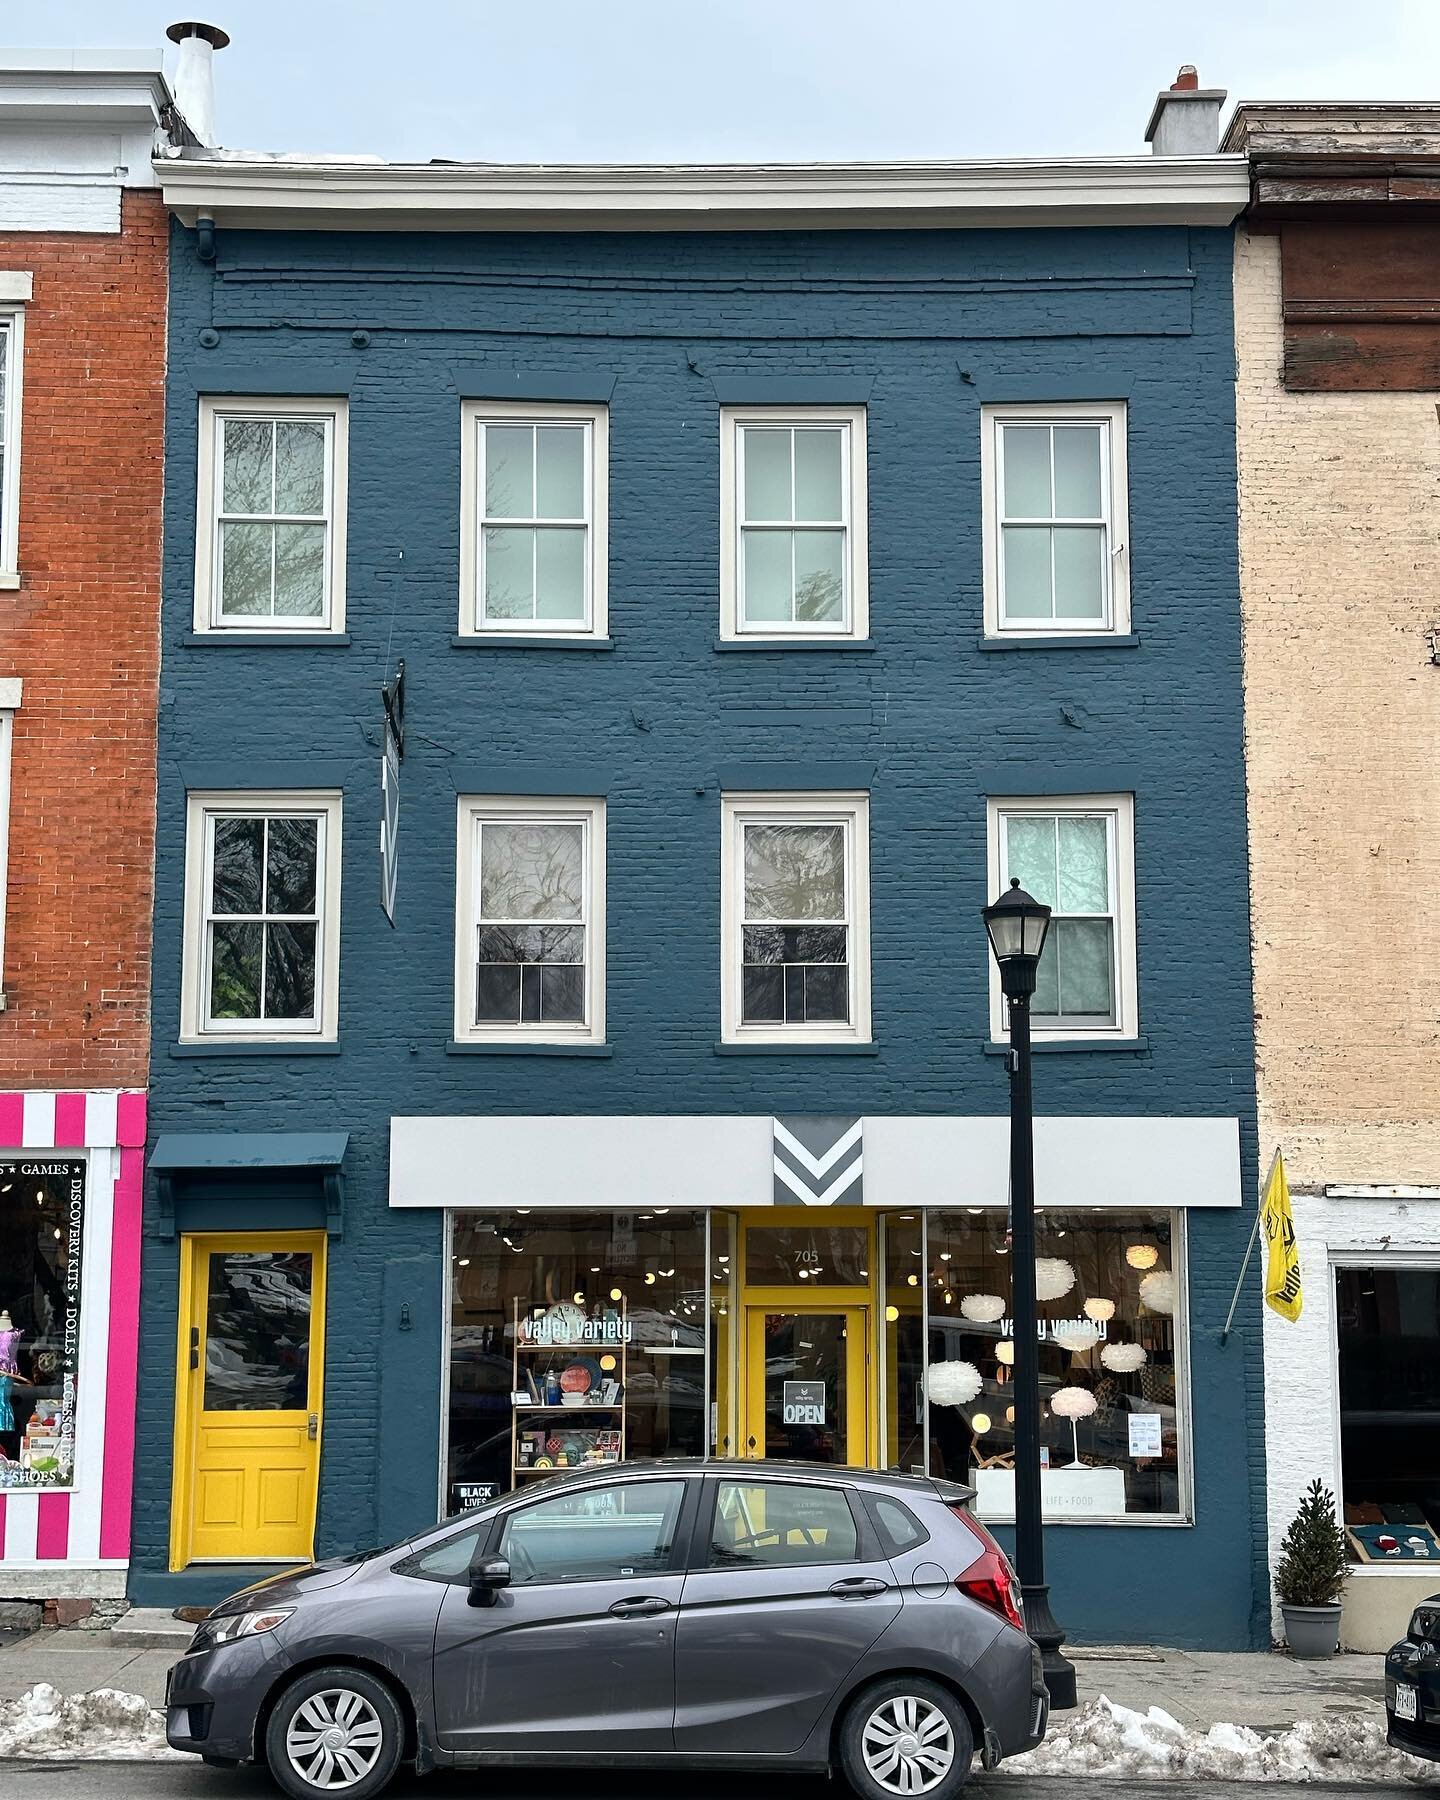 New project!  We&rsquo;ll be working to expand living space into the attic of this darling three-story mixed-use building on Hudson&rsquo;s Main Street.  Check out those original hand-hewn lumber beams!